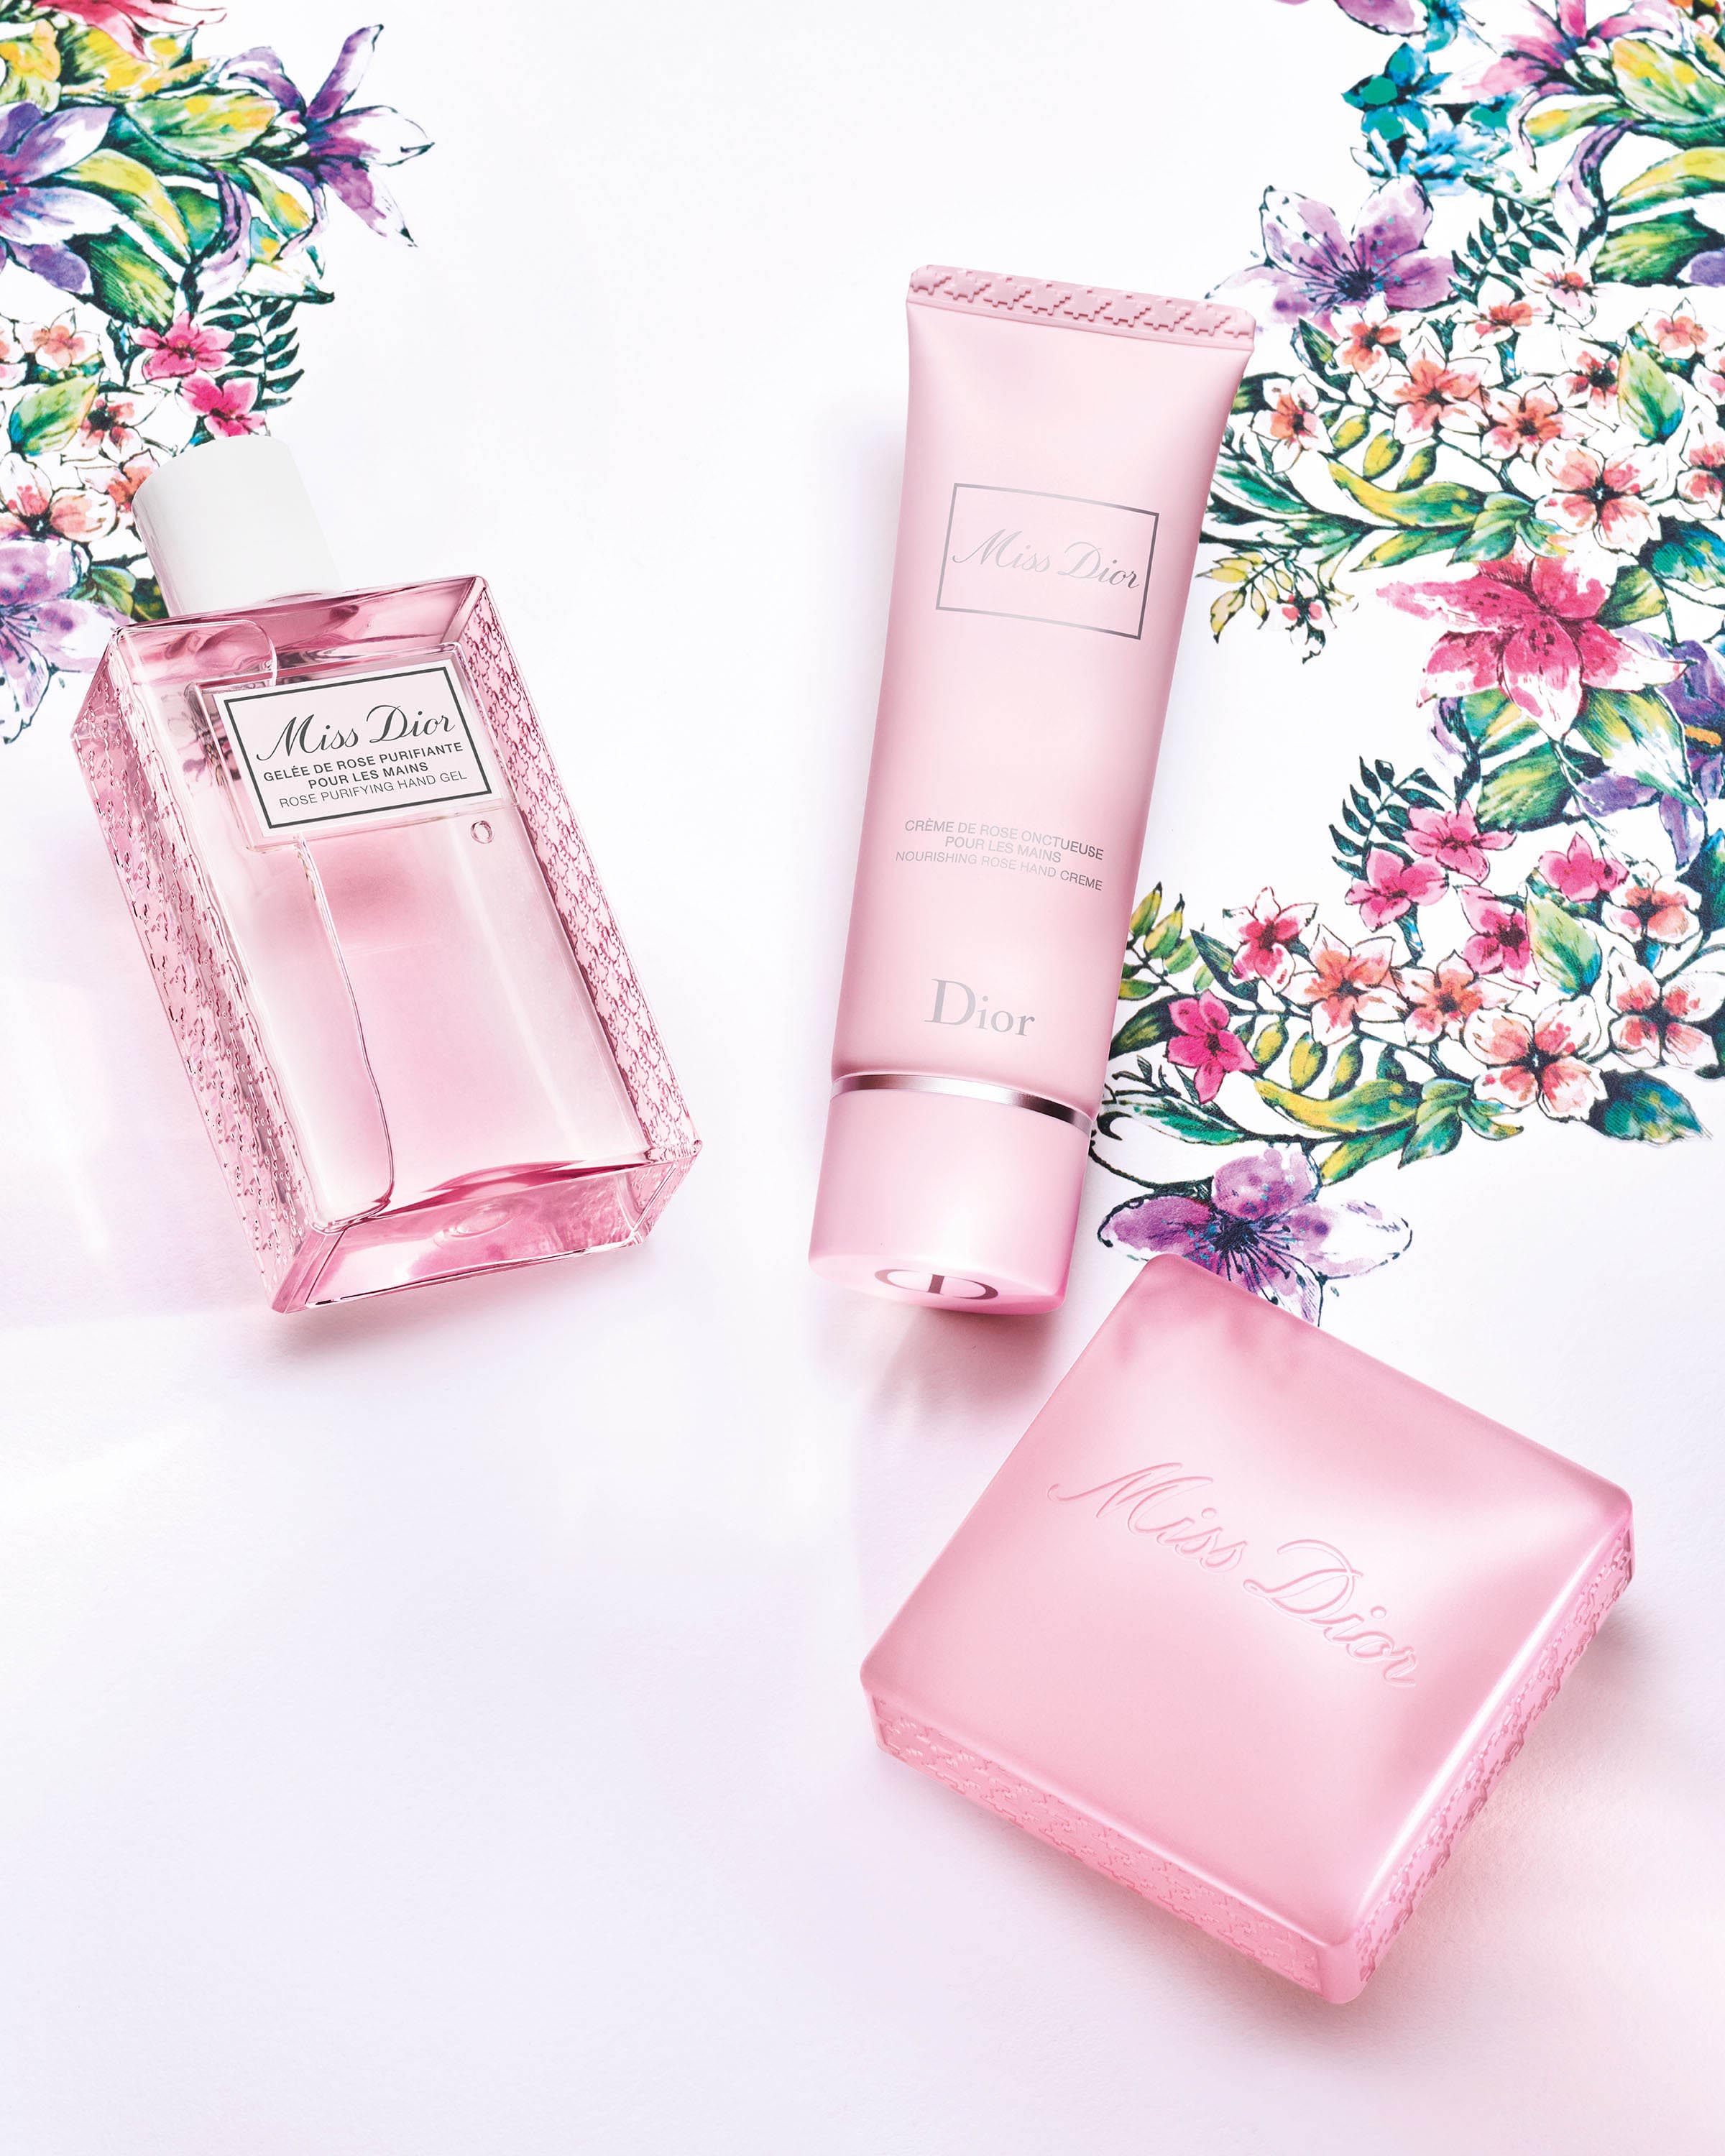 3 makeup products in a Blooming Boudoir limited edition